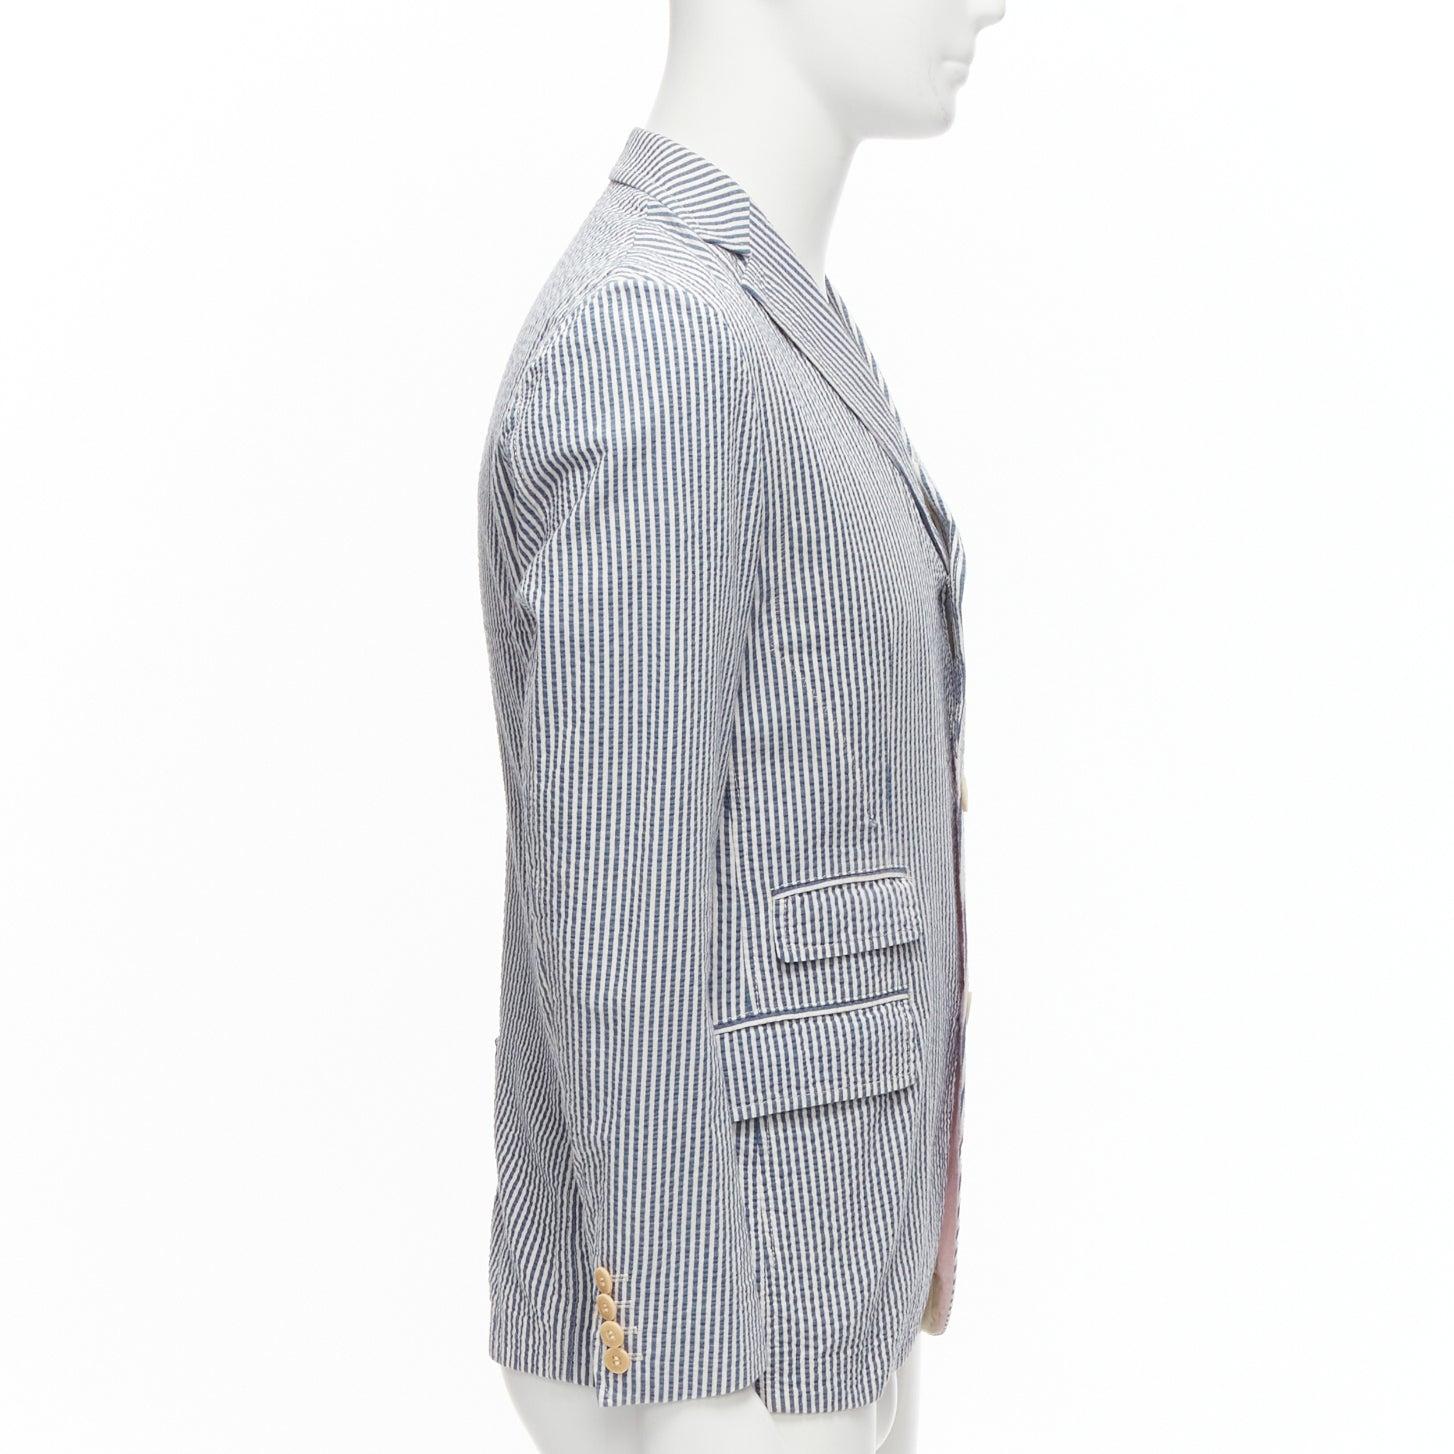 JUNYA WATANABE MAN 2013 white striped seersucker cotton casual blazer jacket S In Excellent Condition For Sale In Hong Kong, NT